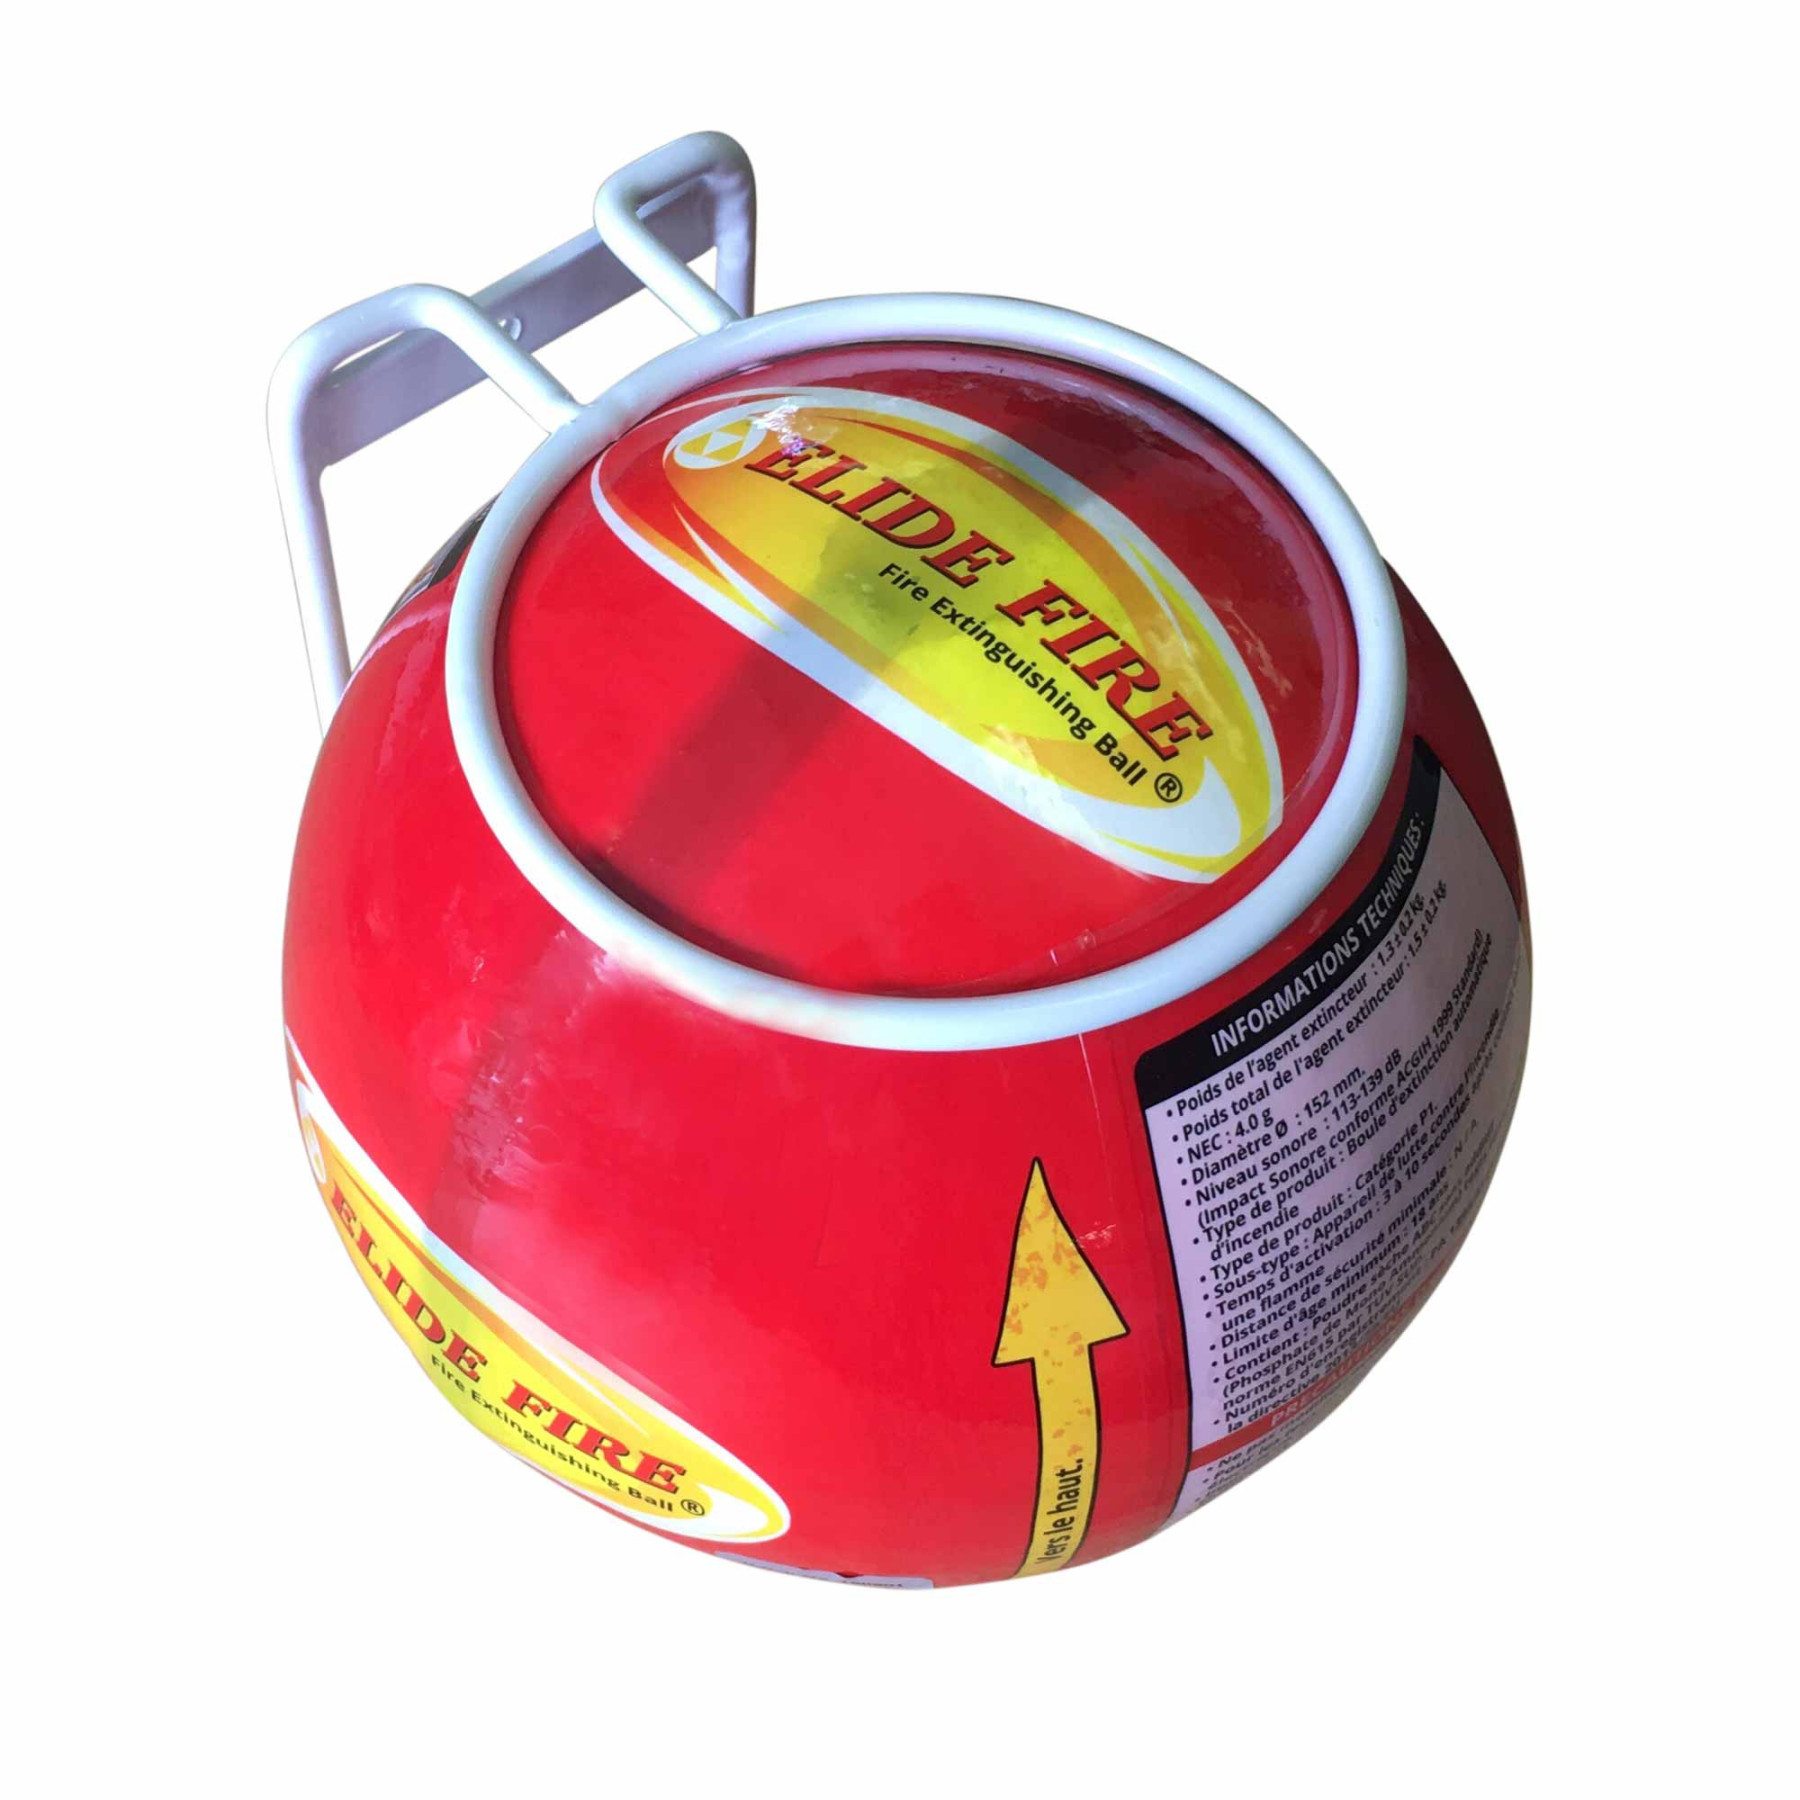 Elide Fire® Official - Fire Extinguishing Ball